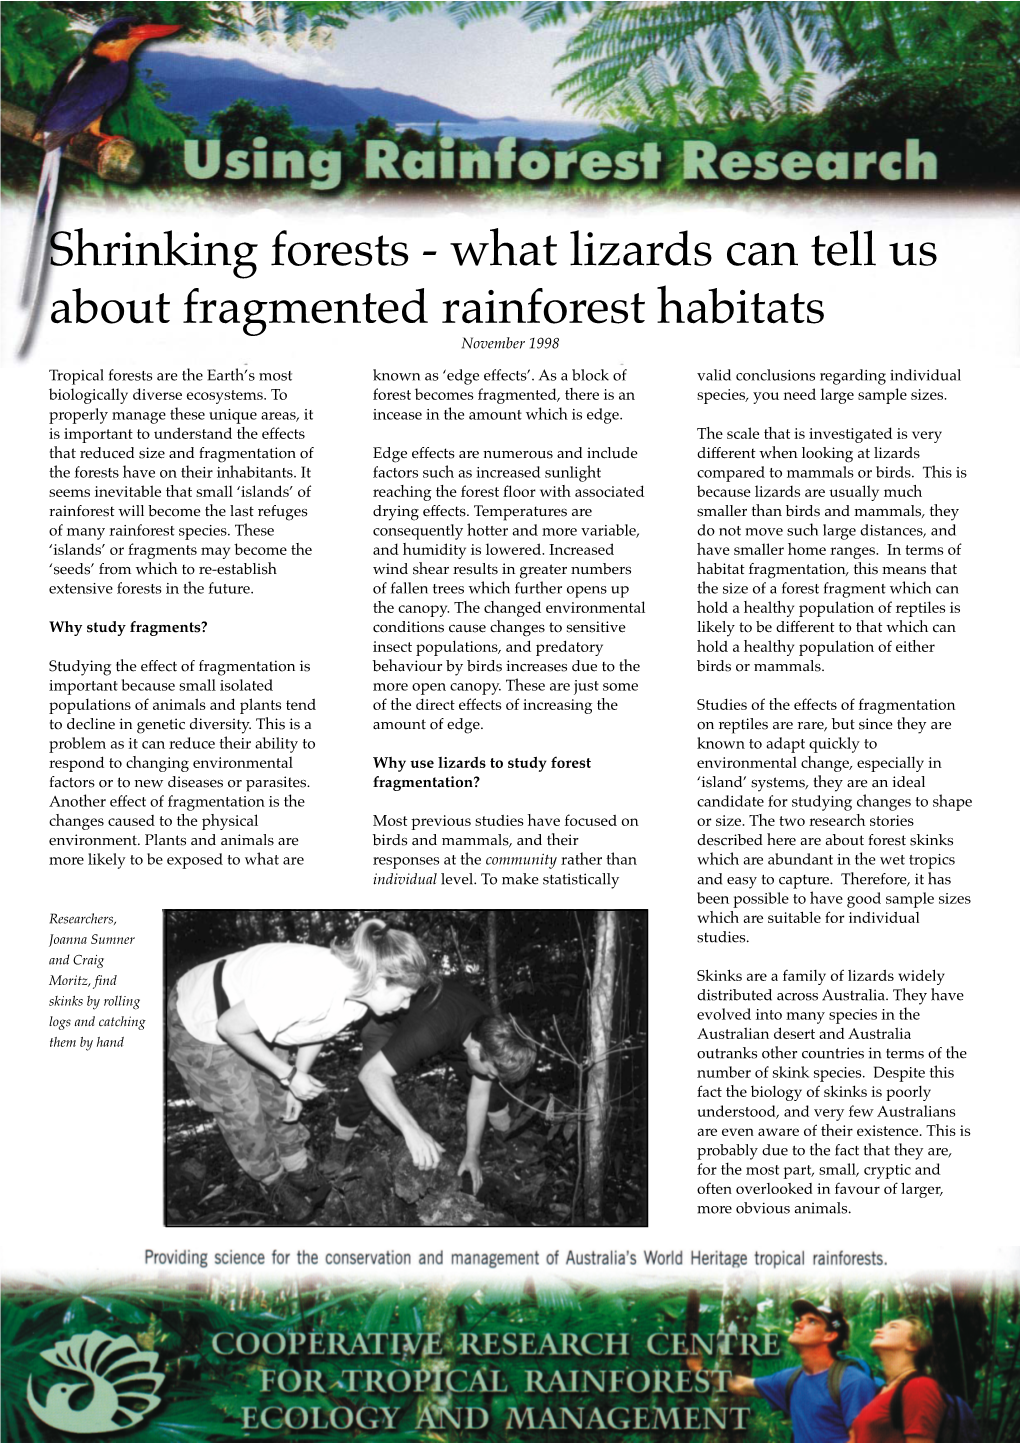 Shrinking Forests - What Lizards Can Tell Us About Fragmented Rainforest Habitats November 1998